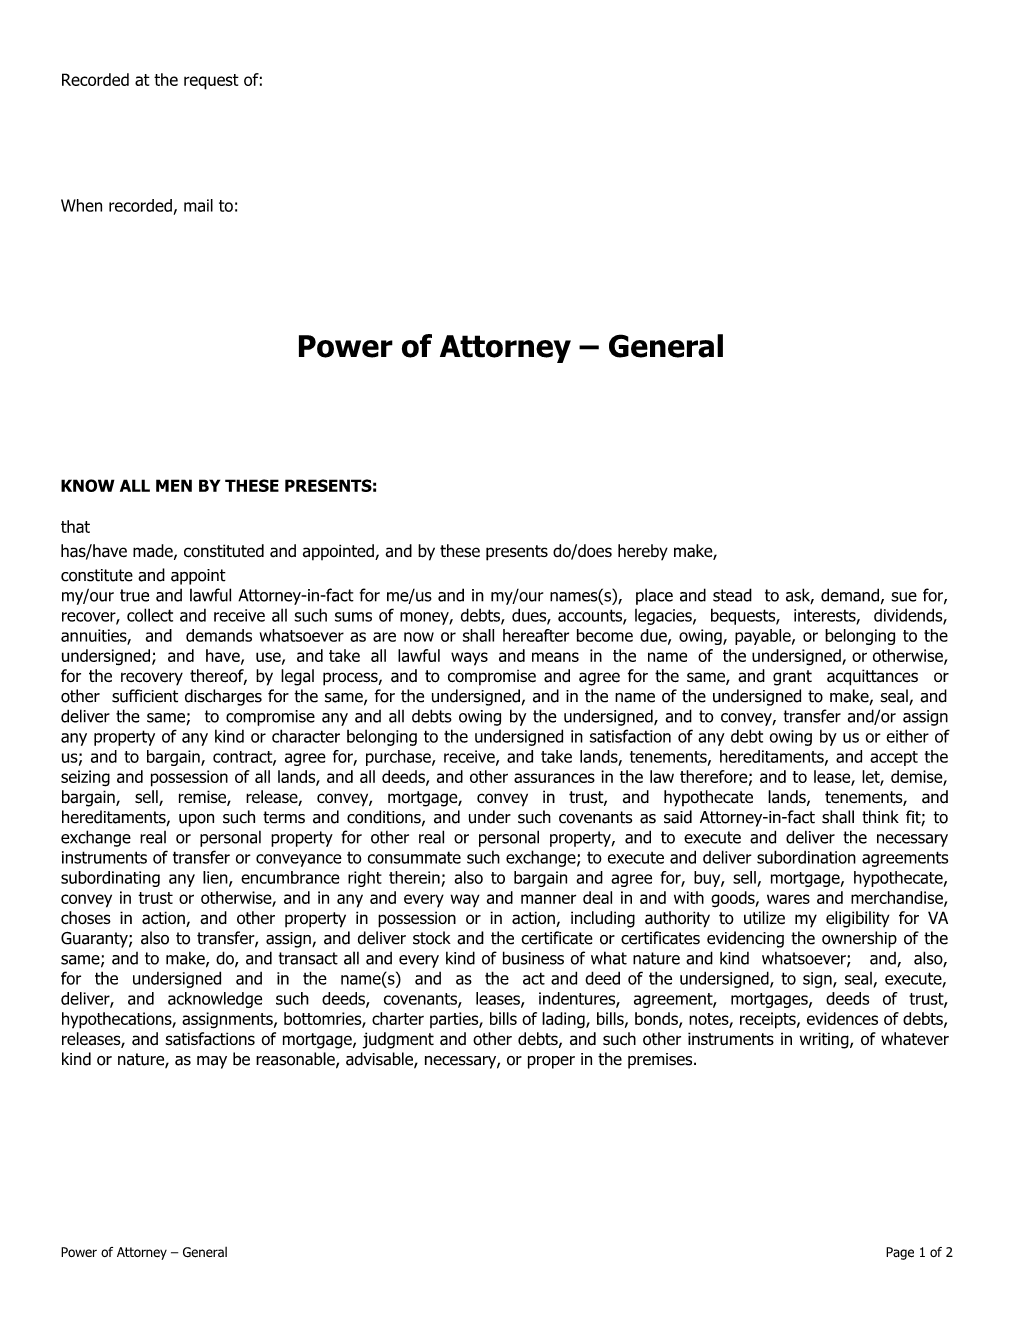 Power of Attorney (General)